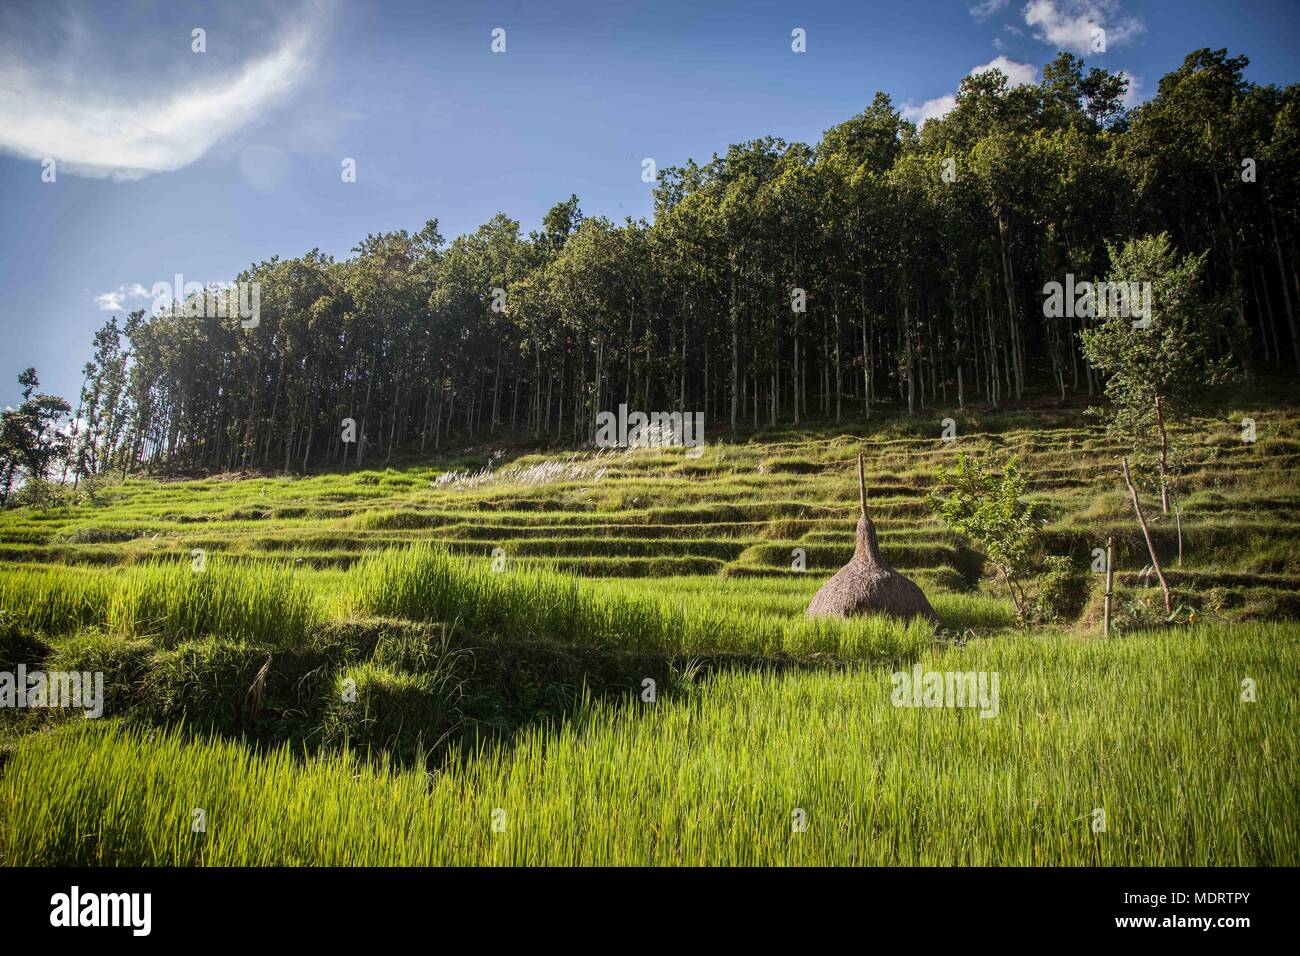 A vivid blue sky with clouds and lens flare over rice terraces in the Dhading District of Nepal Stock Photo